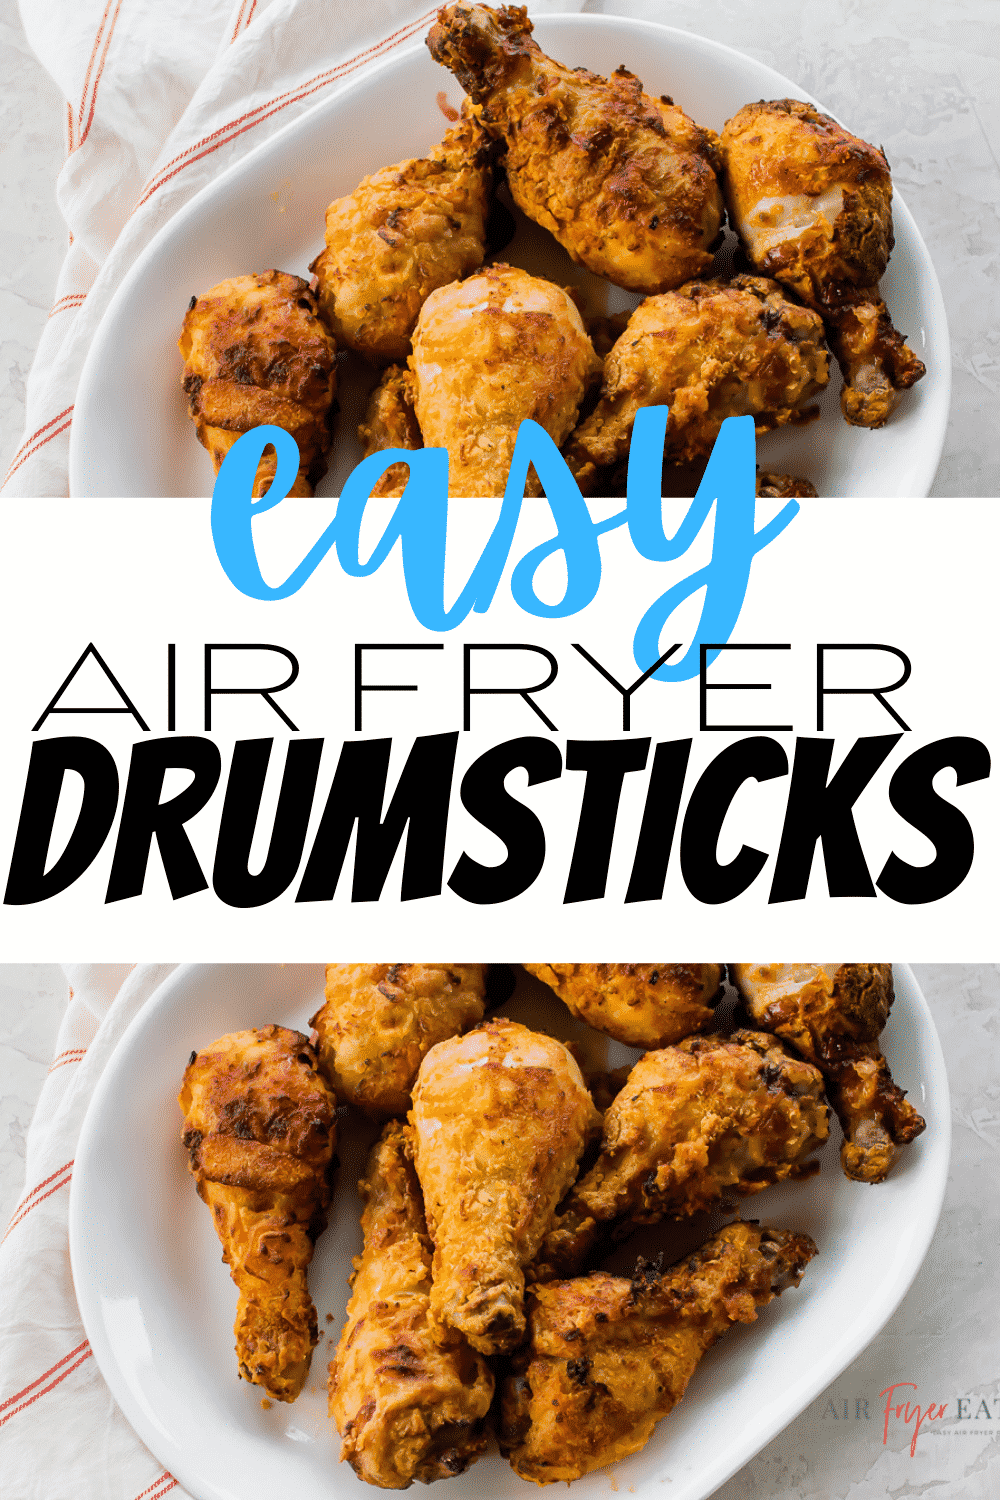 Air Fryer Chicken Drumsticks are a quick budget dinner the family will love! Ditch the oil and make the crispiest fried chicken in the air fryer with a seasoned flour coating. #airfryerdrumsticks #airfryerchicken #airfryerchickendrumsticks via @vegetarianmamma